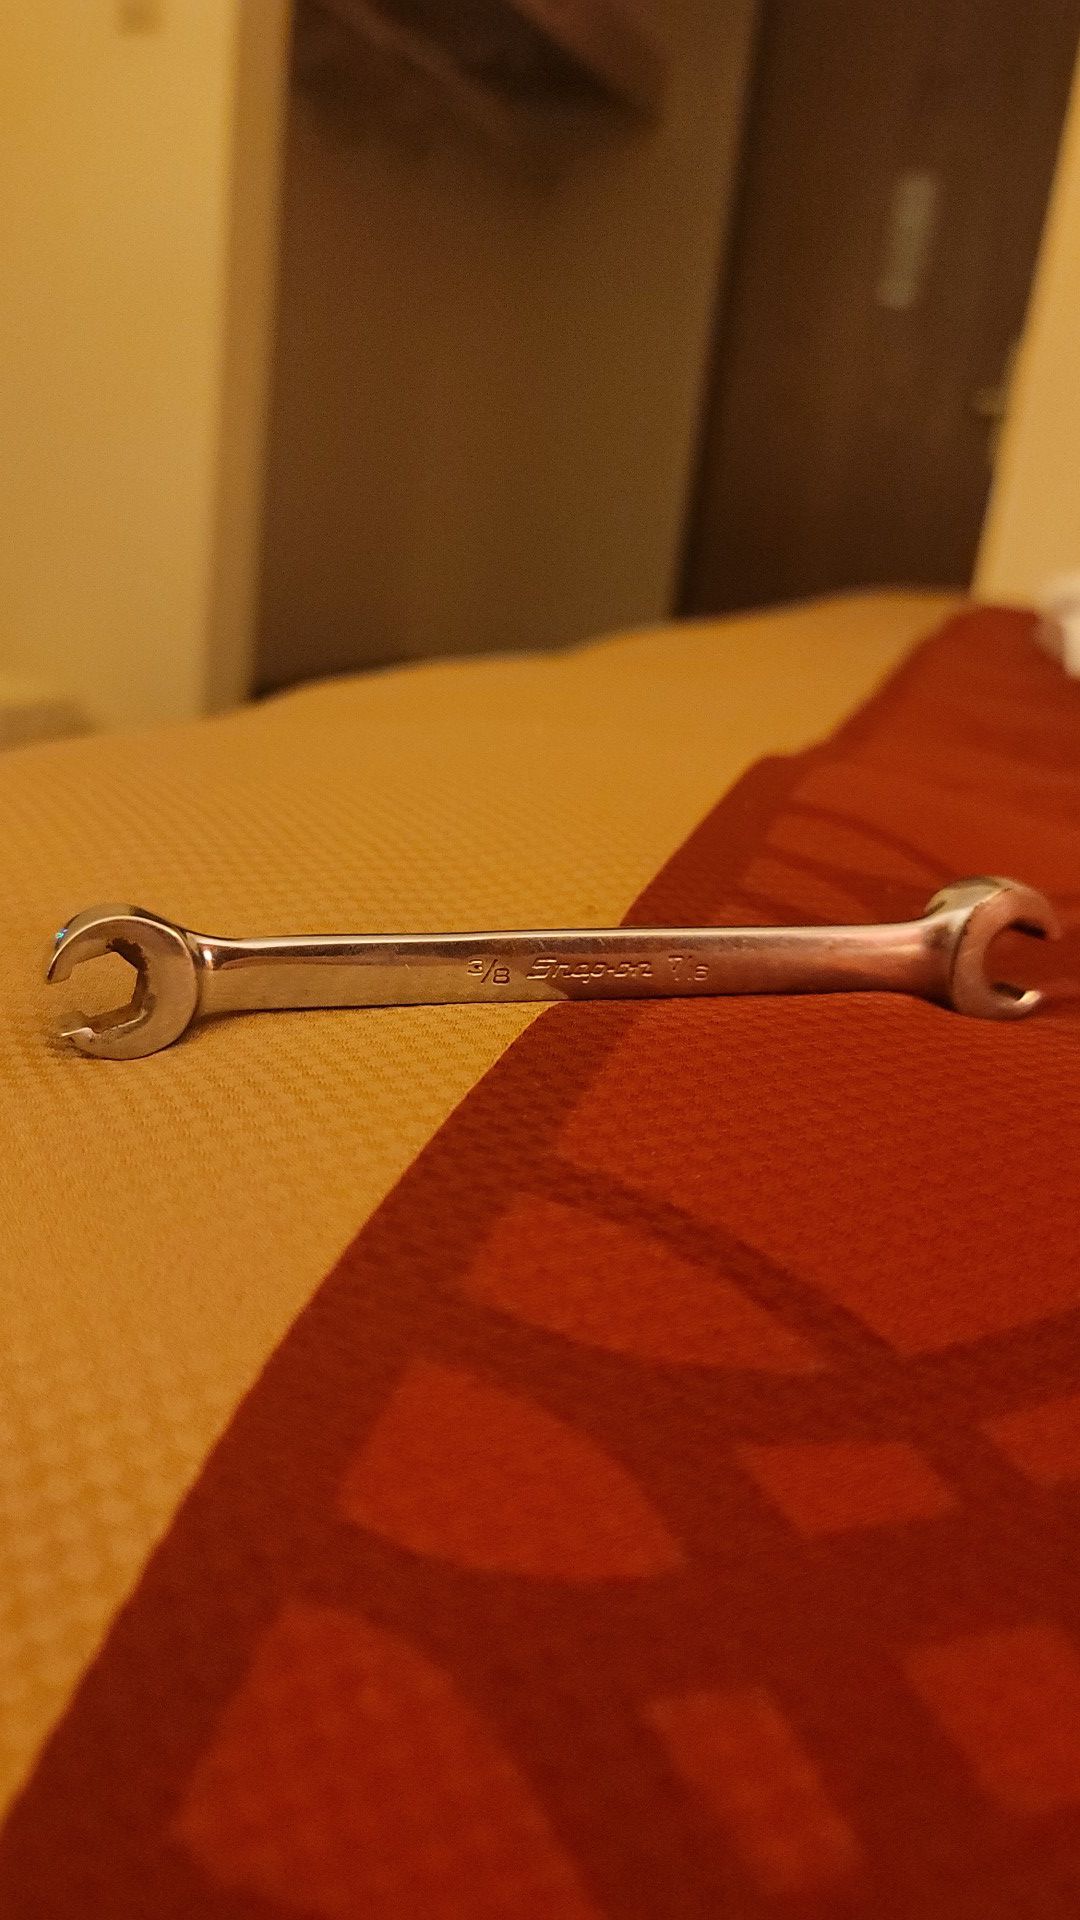 Snap-On line wrench 3/8" 7/16"